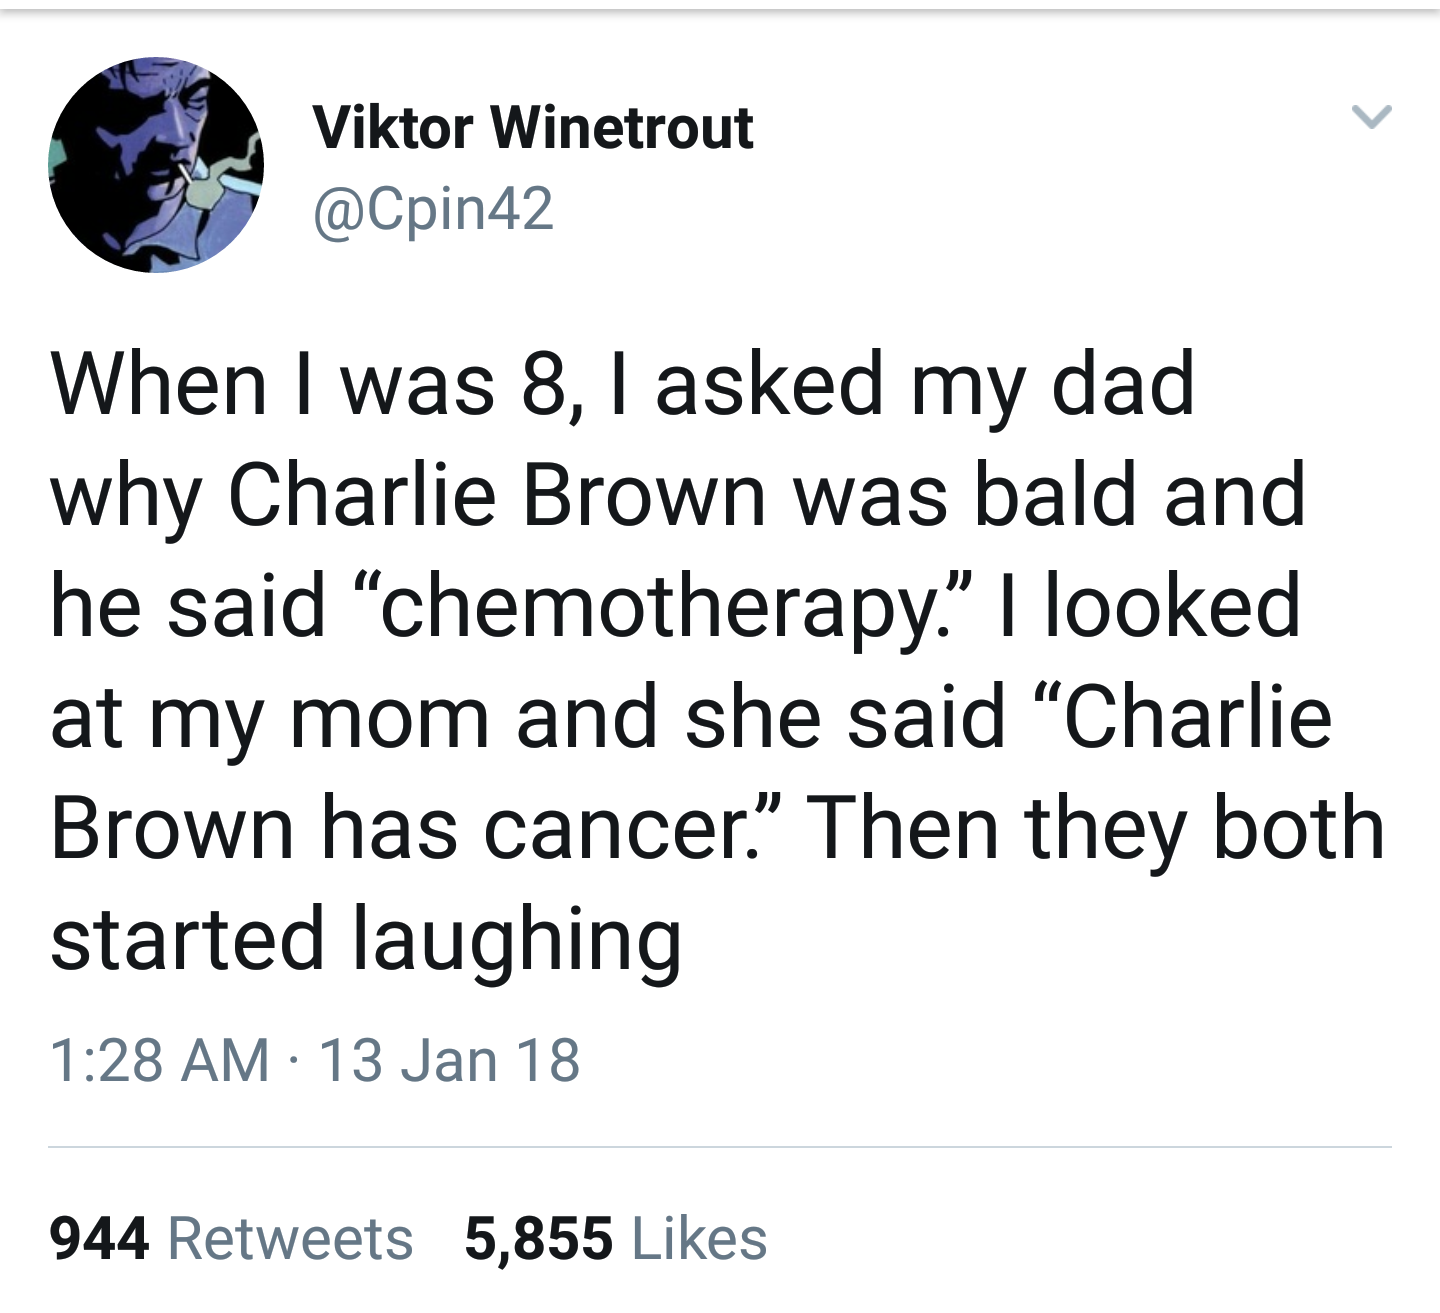 dad jokes- Viktor Winetrout When I was 8, I asked my dad why Charlie Brown was bald and he said "chemotherapy." I looked at my mom and she said "Charlie Brown has cancer. Then they both started laughing 13 Jan 18 944 5,855